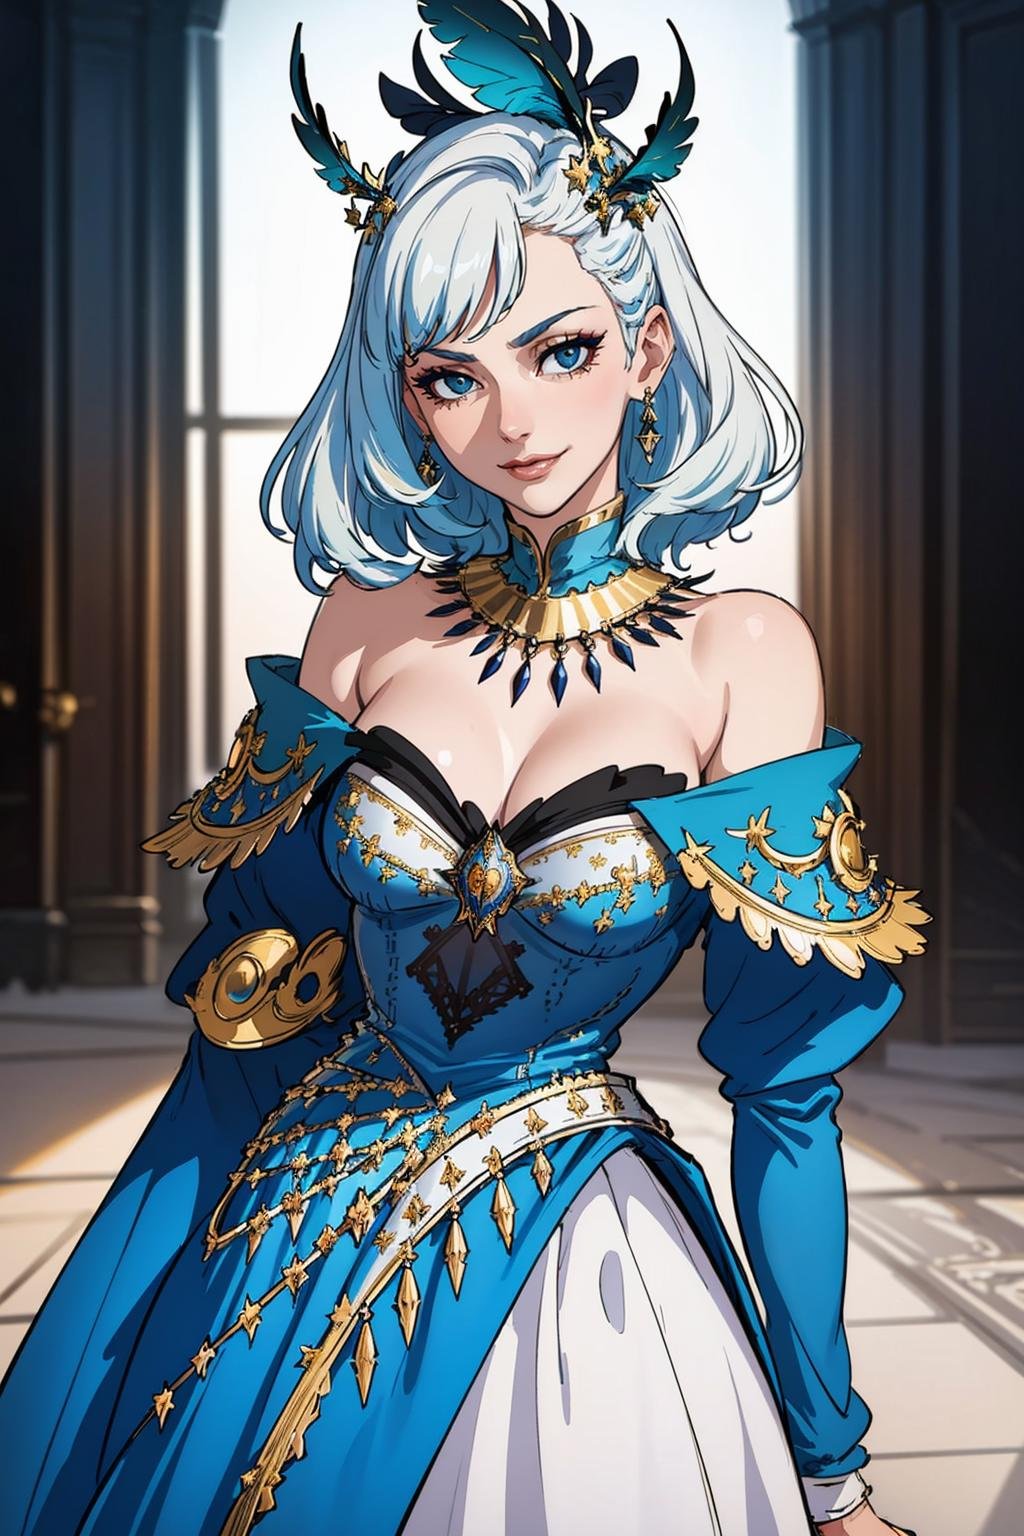 ((Masterpiece, best quality,edgQuality)),smirk,smug,white hair,Haute_Couture, blue gown,golden embroidery, woman wearing a Haute_Couture dress,(((edgTM, wearing edgTM_style fashion, eccentric clothing))),feathers, <lora:edgLycorisMugler-light:1>